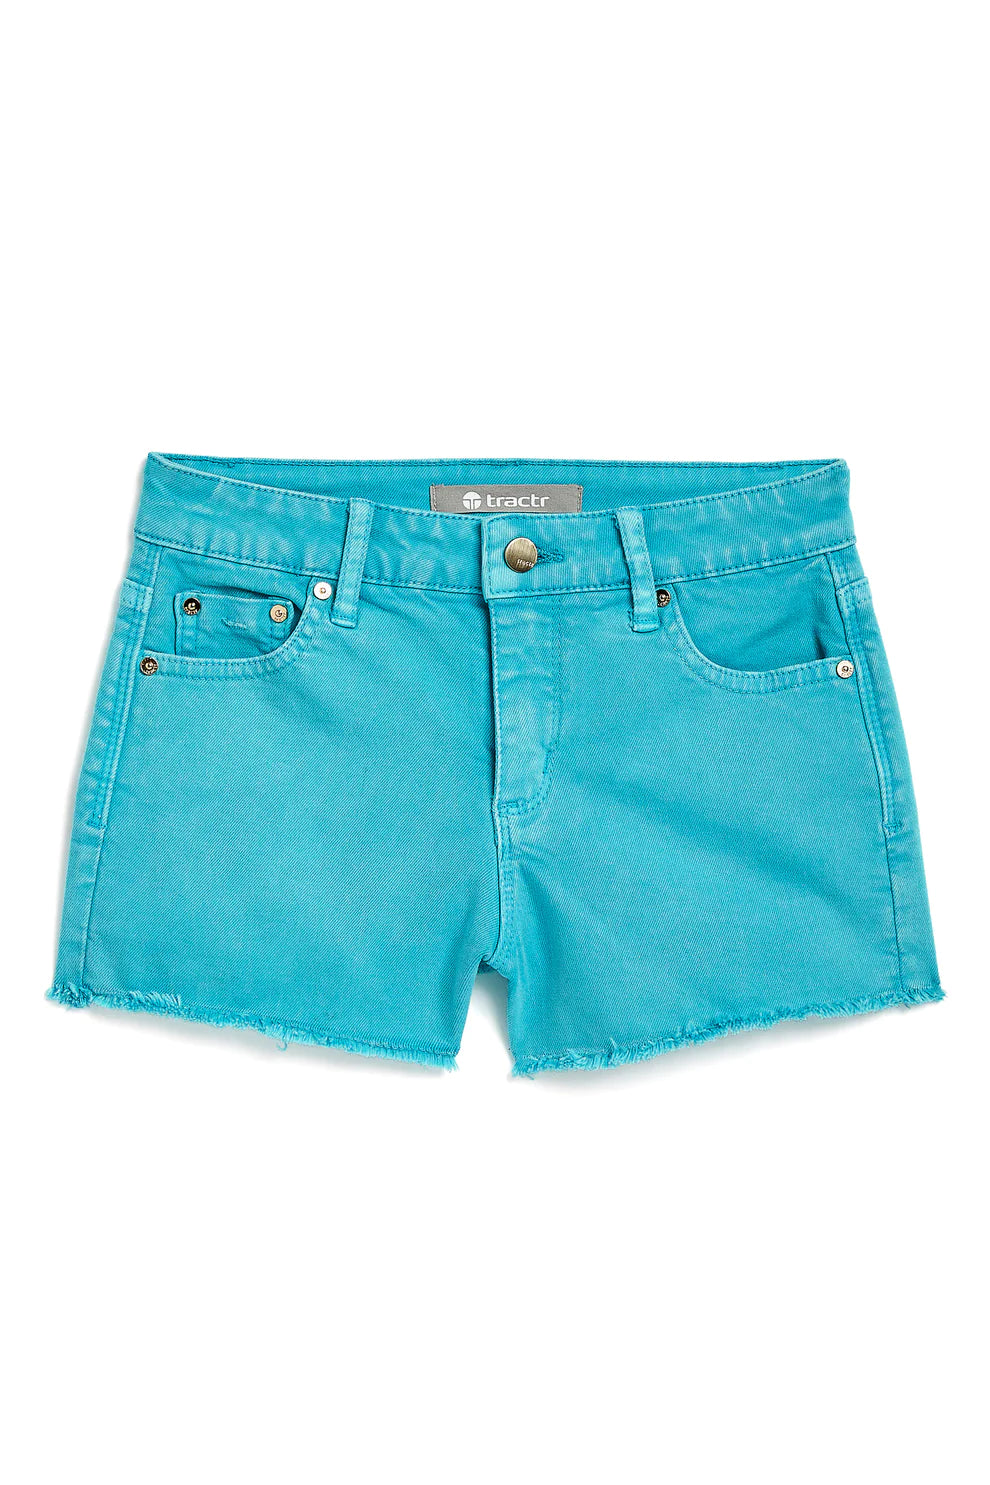 Brittany Shorts in Peacock Blue